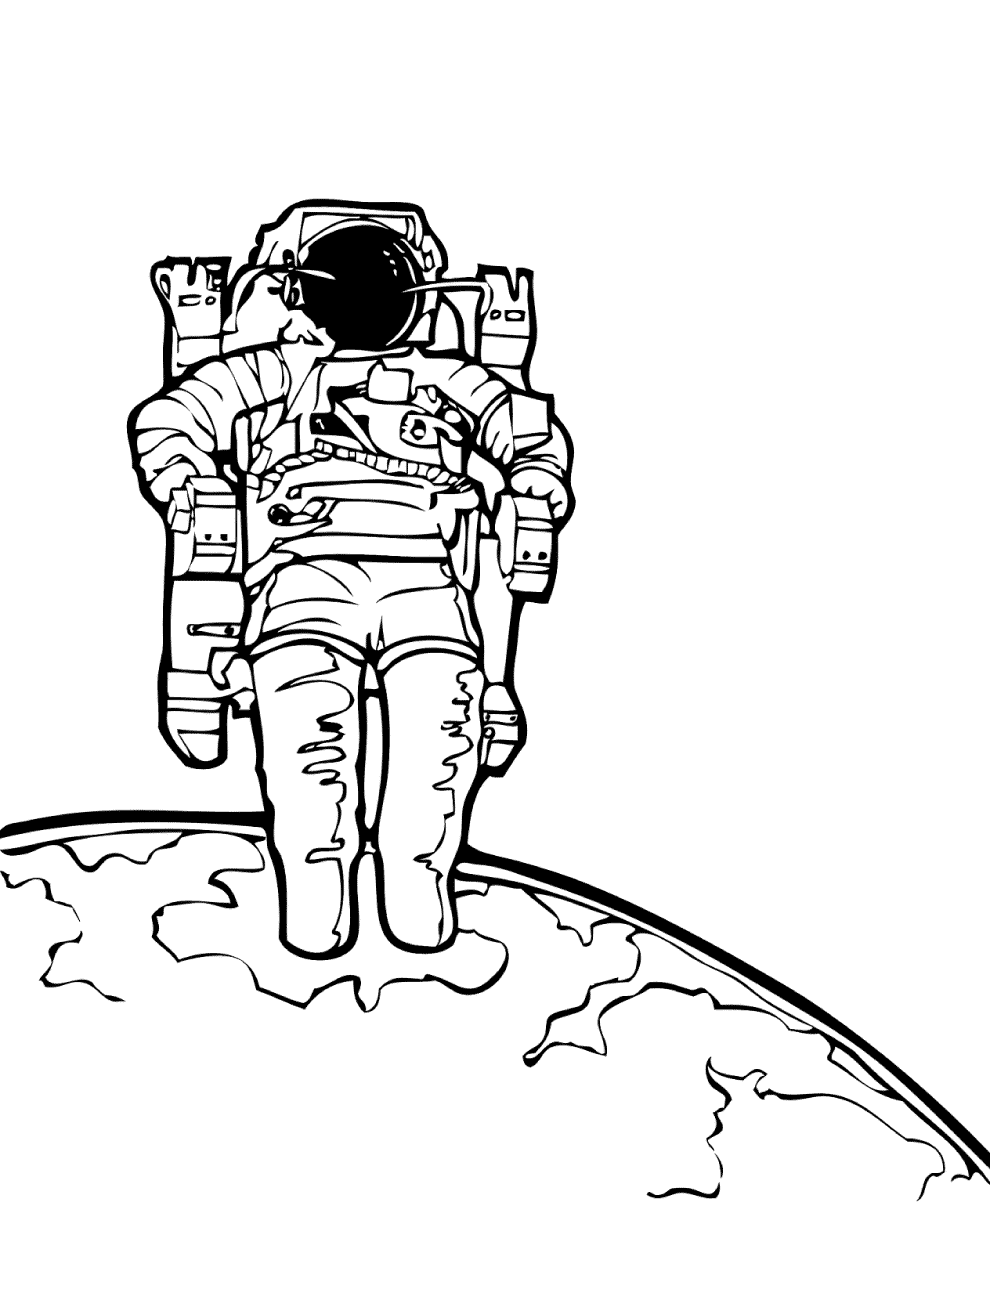 Cosmonaut in the outer space coloring page